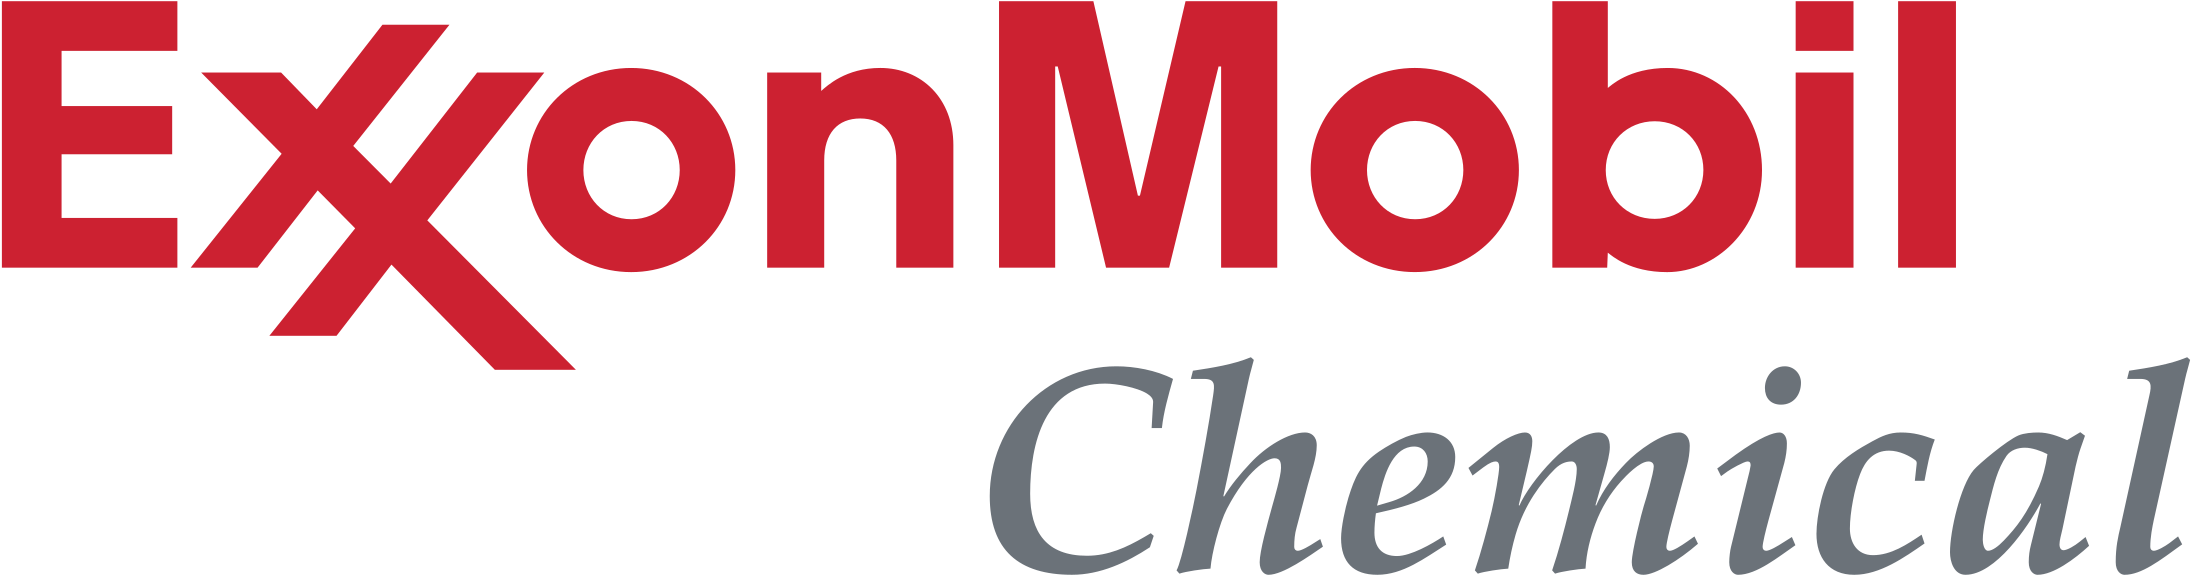 Download Exxonmobil Chemicals Logo Png Transparent 1000ml Erlenmeyer Flask Quantity 36 Png Image With No Background Pngkey Com